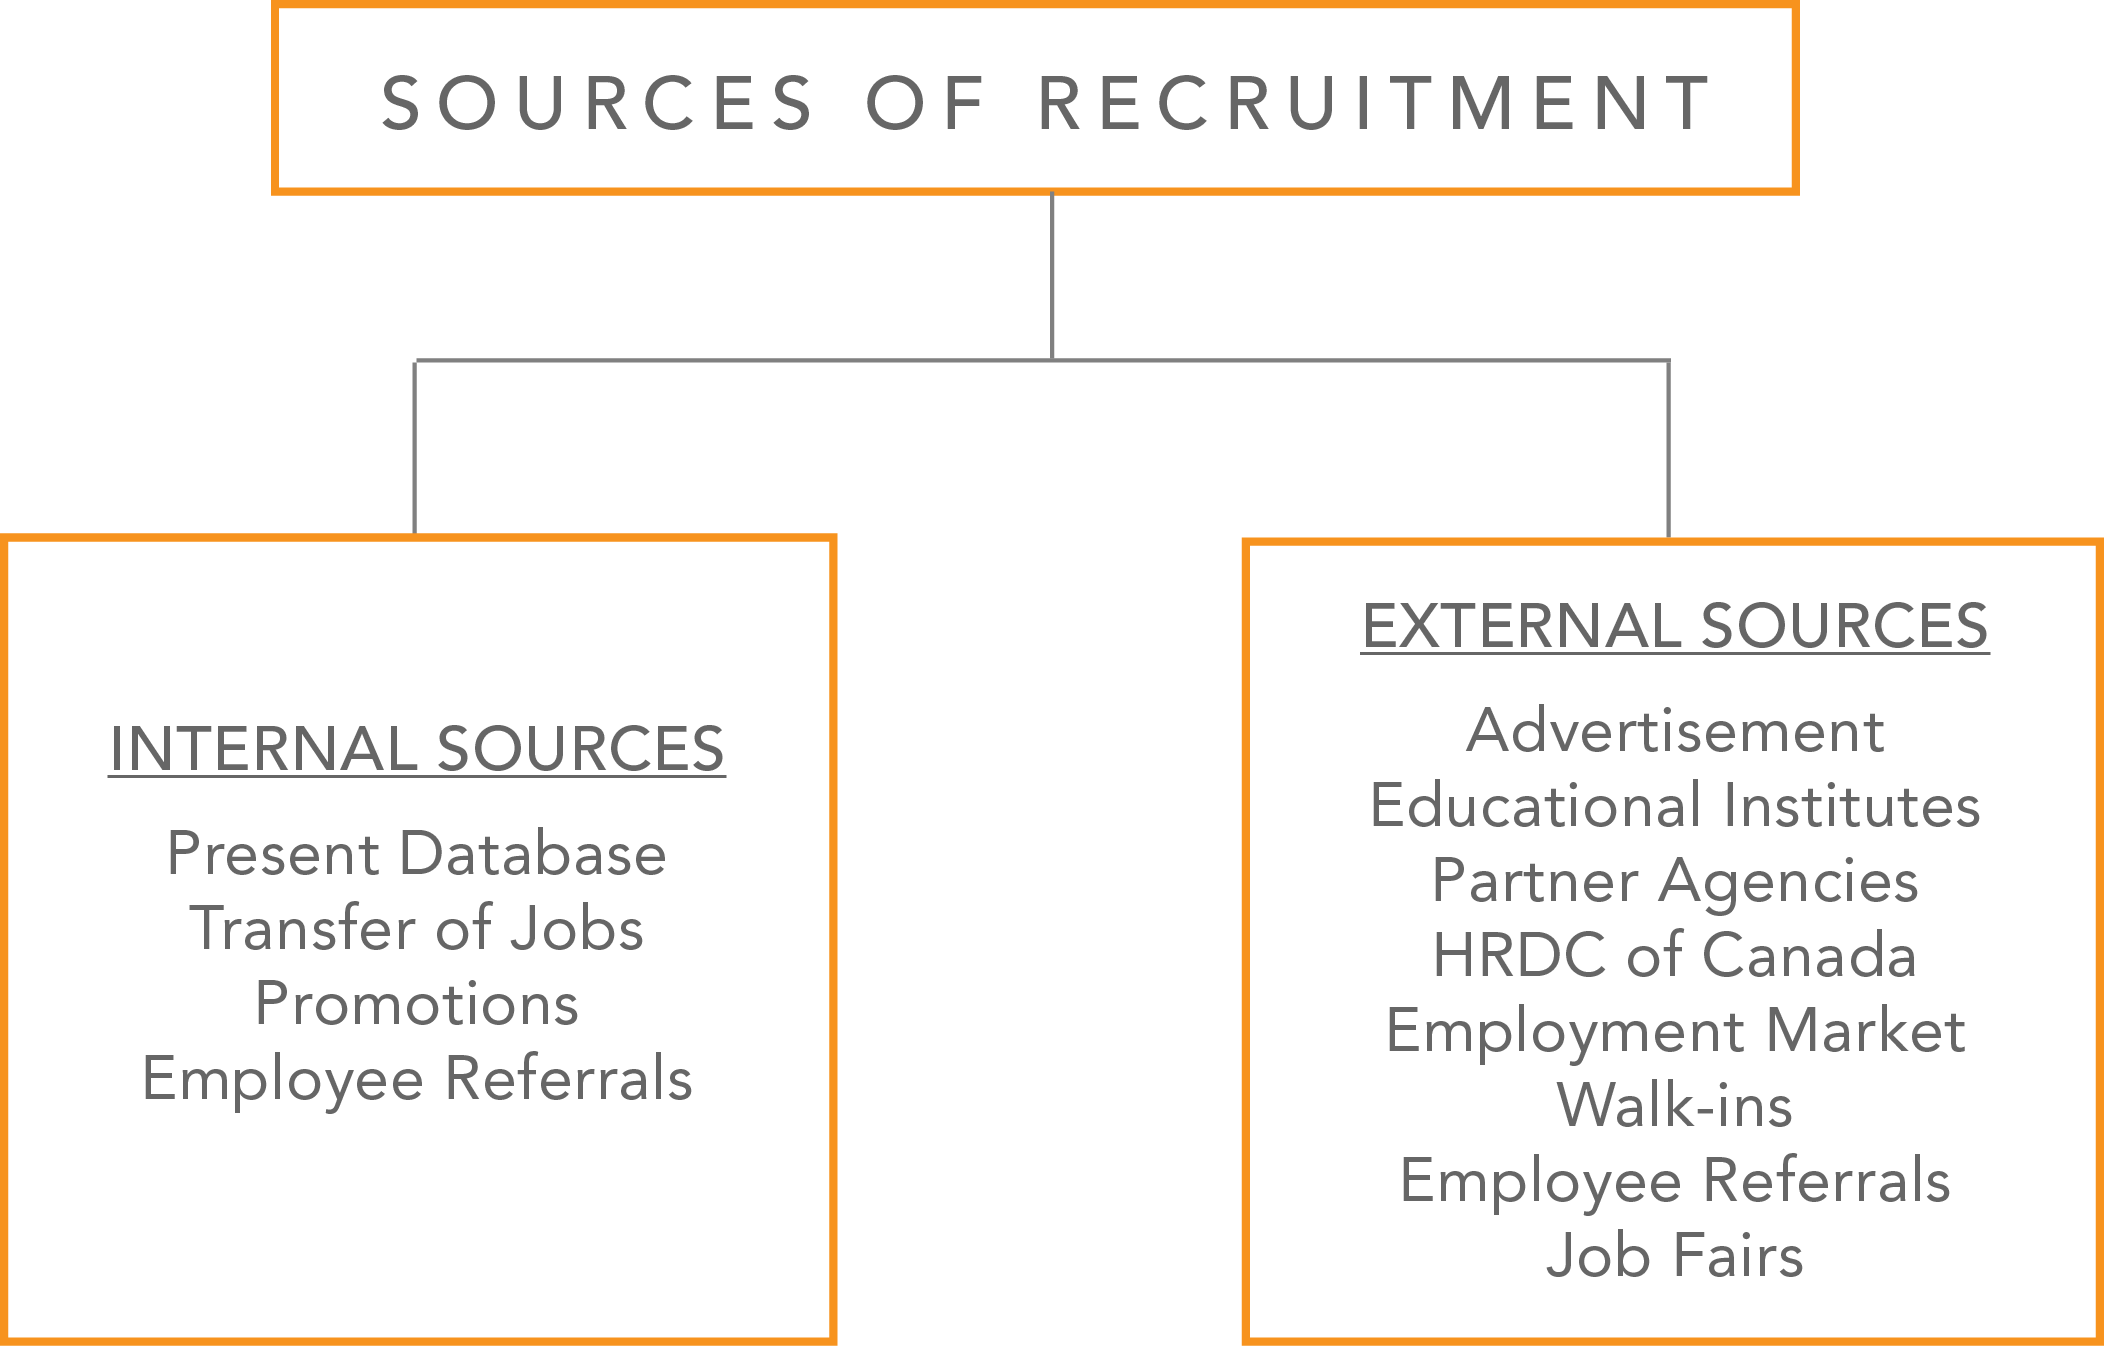 M&M sources of recruitment which include both internal and external sources.